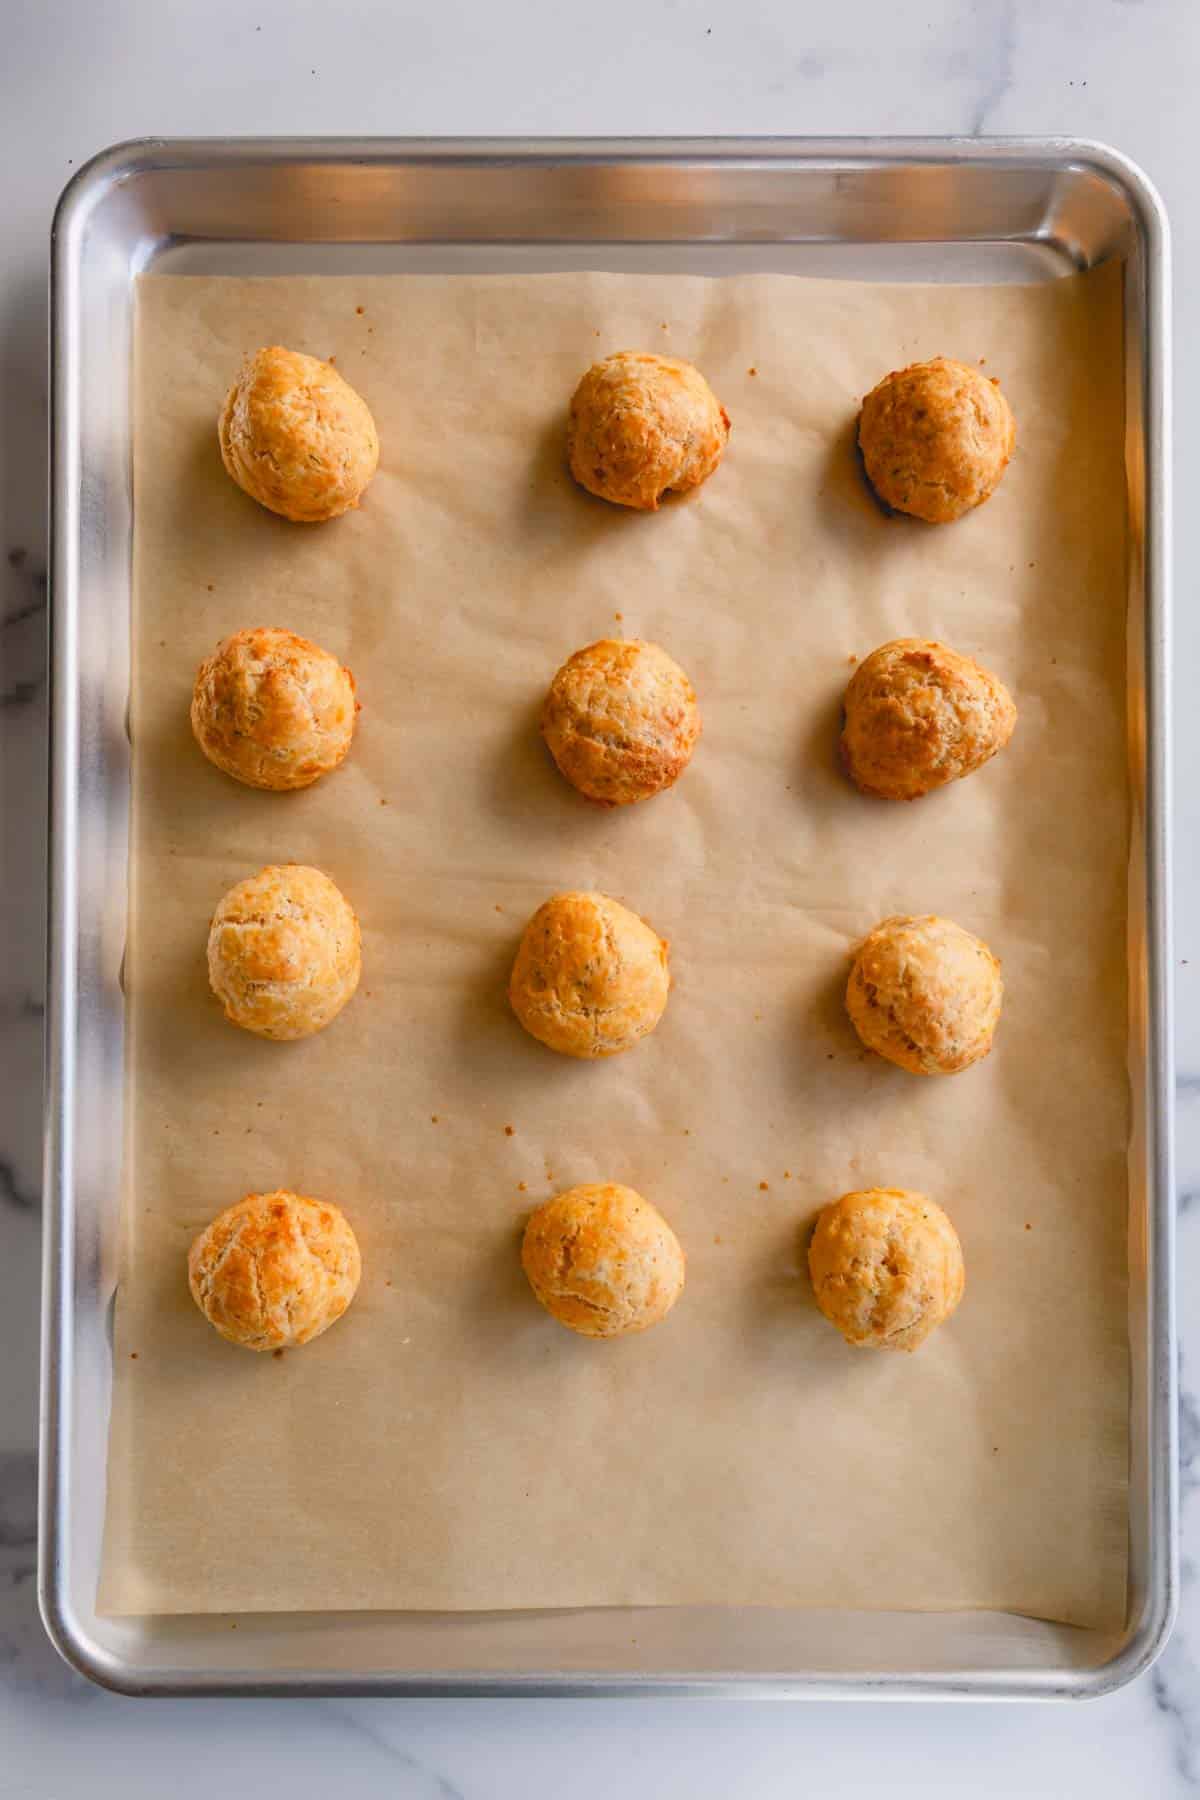 Baked cheese puffs on a baking sheet.